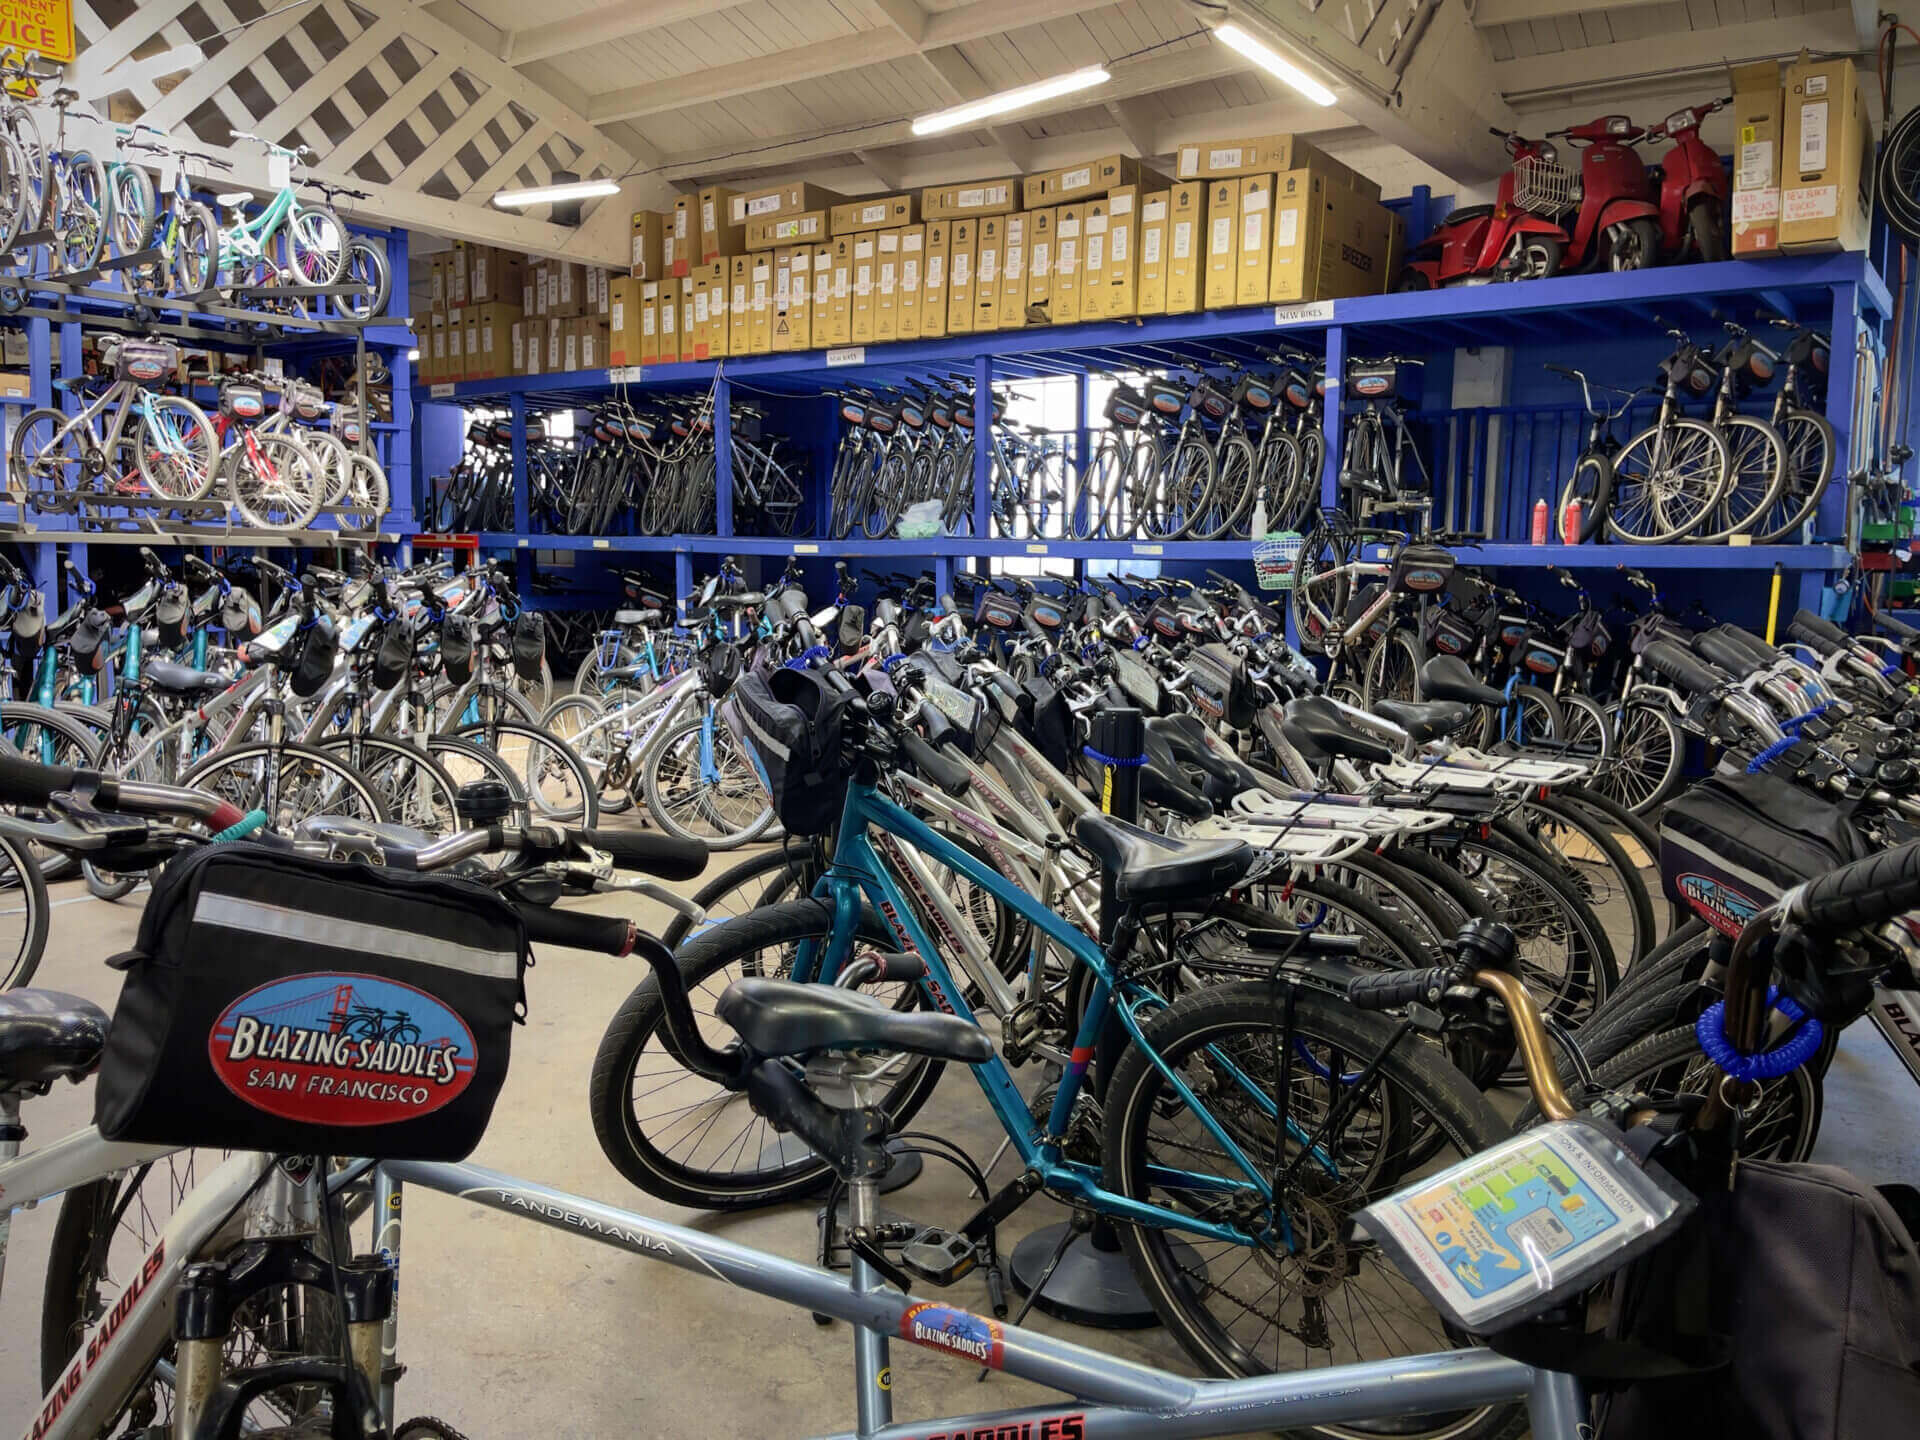 A room full of blazing saddles cycles